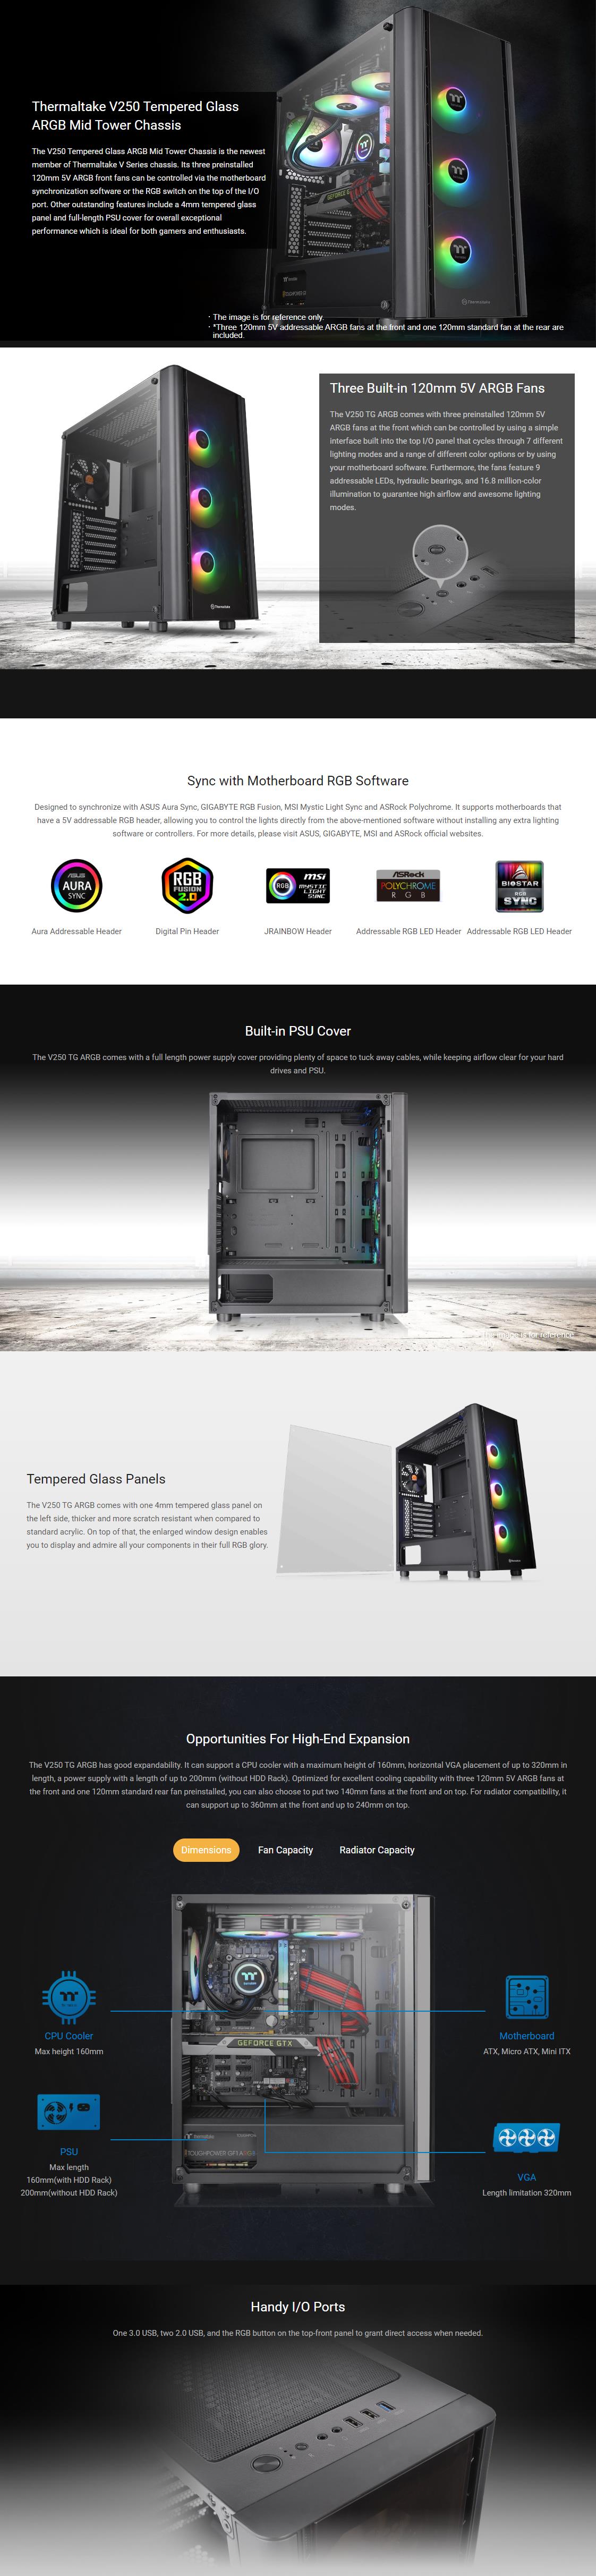 A large marketing image providing additional information about the product Thermaltake V250 - ARGB Mid Tower Case - Additional alt info not provided